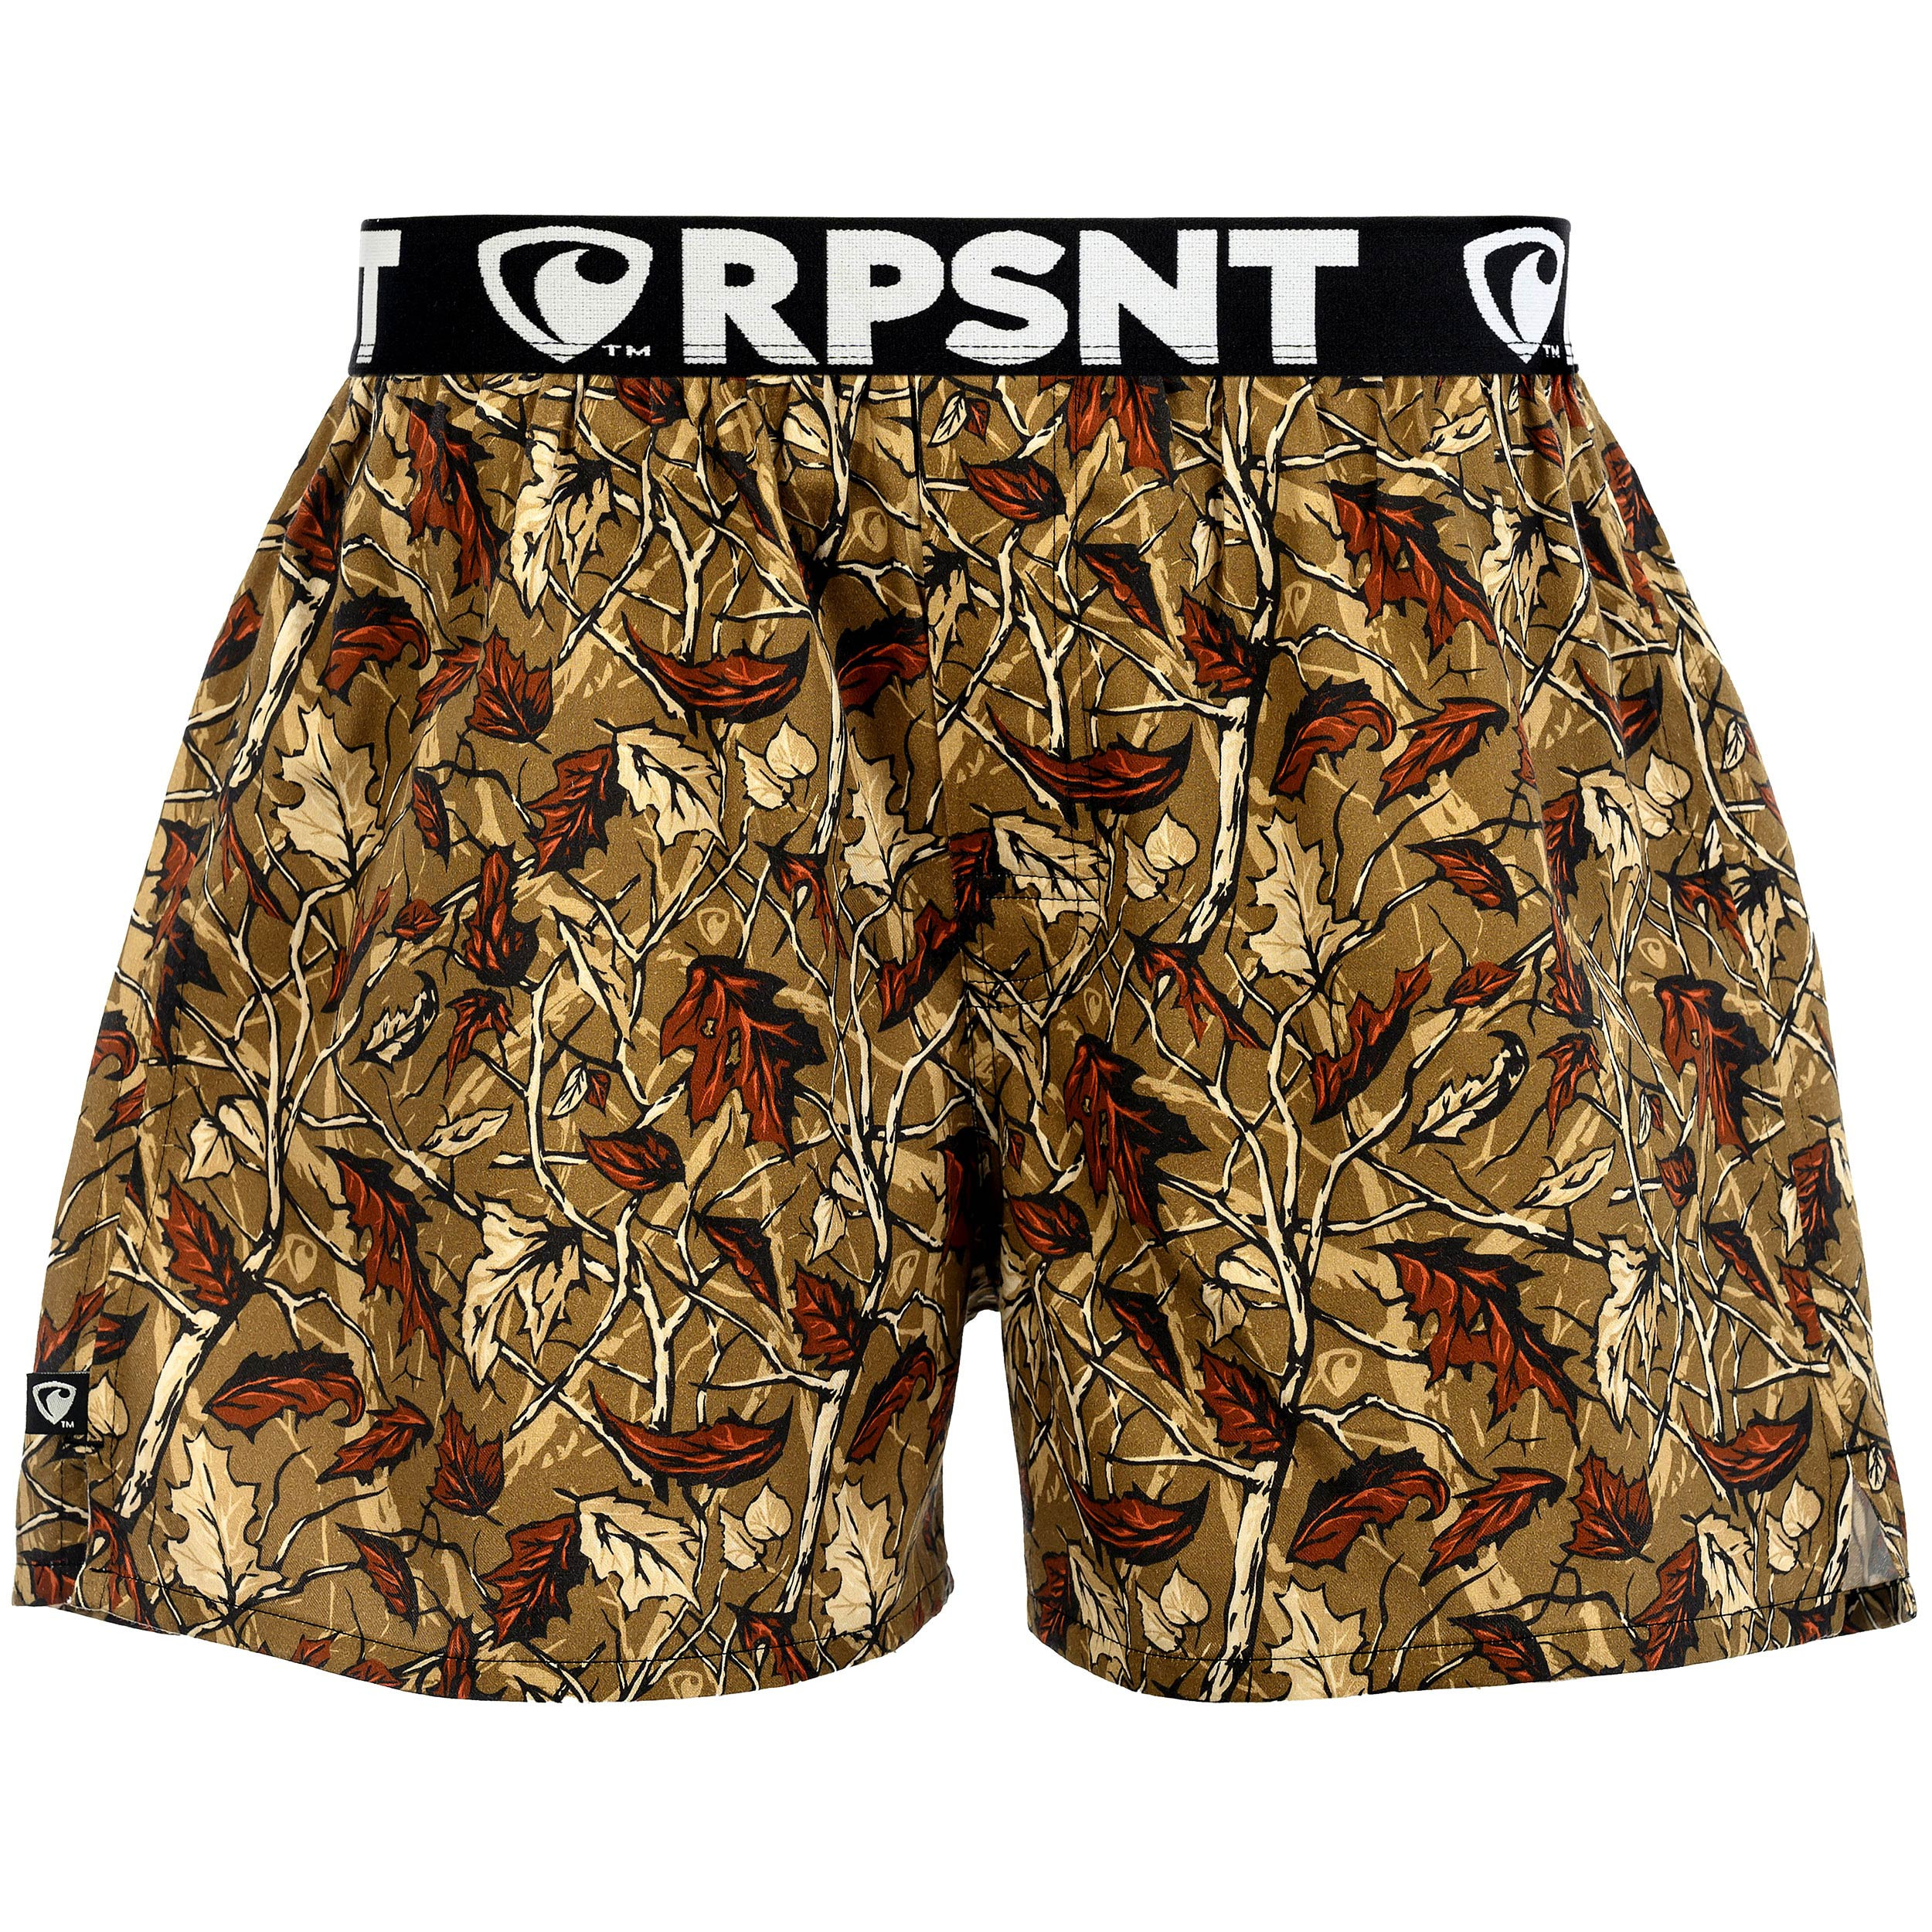 Men's boxer shorts Represent exclusive Mike Behind the Leaf